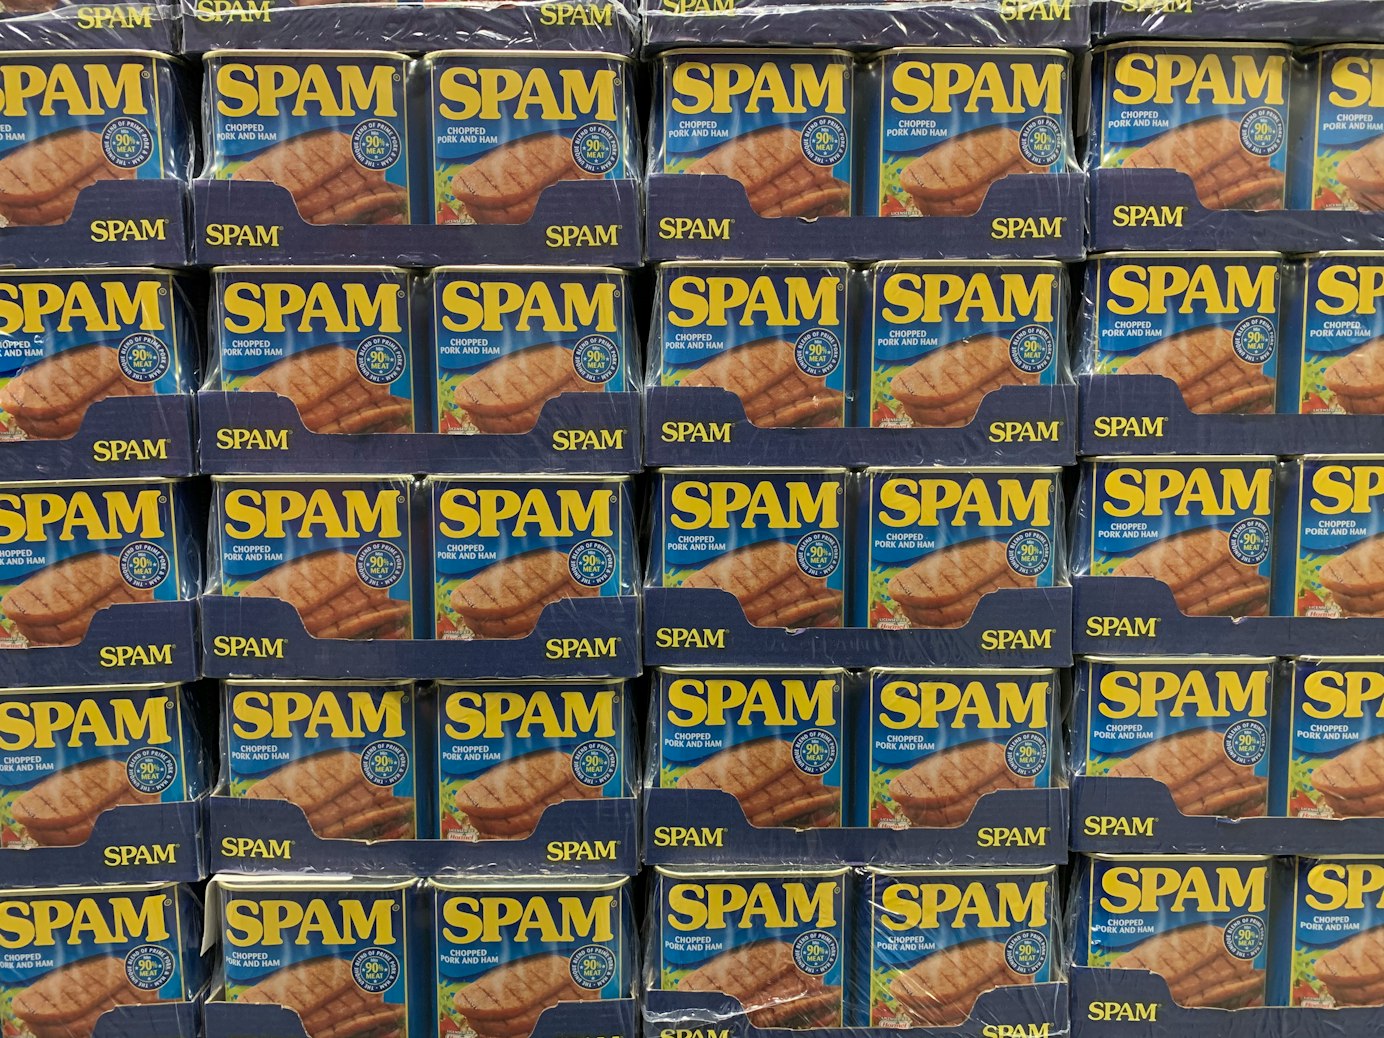 What is Spam?